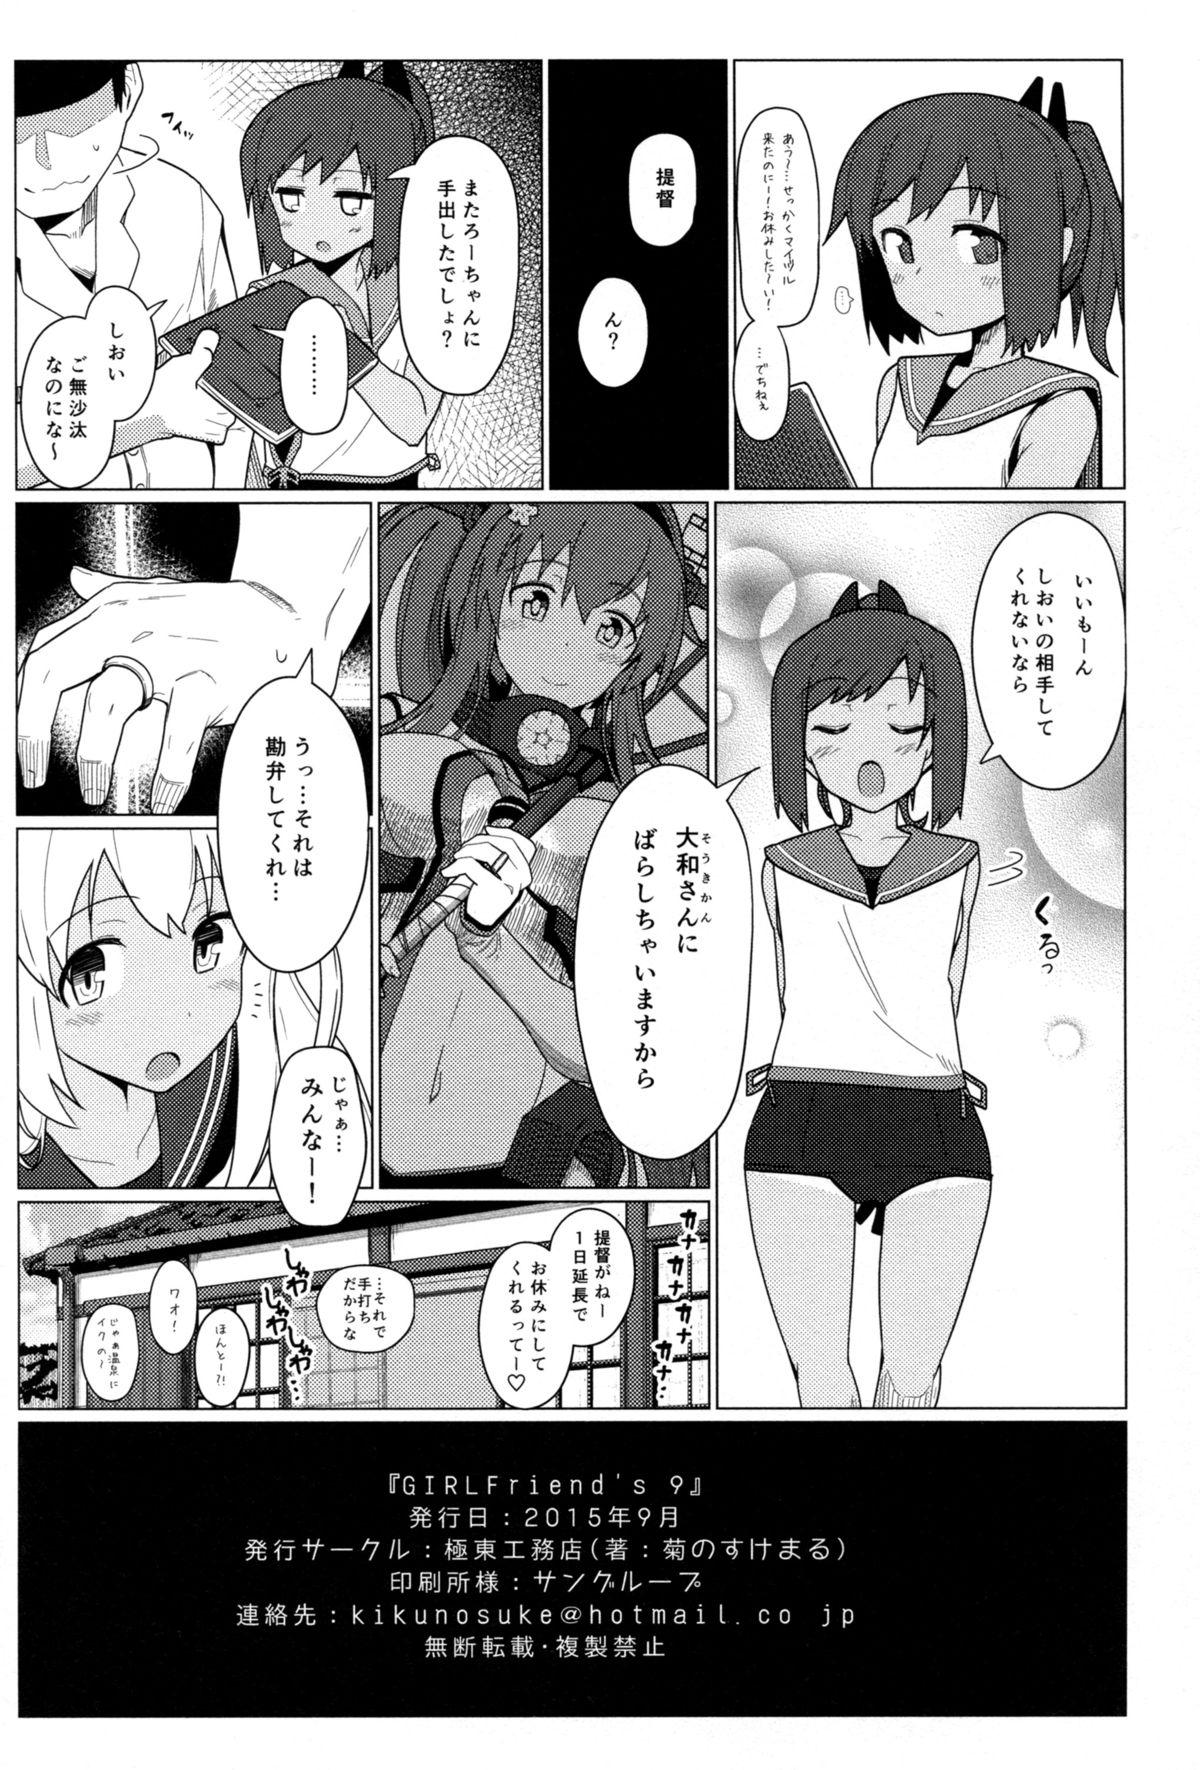 Lesbians GIRLFriend’s 9 - Kantai collection Spycam - Page 22